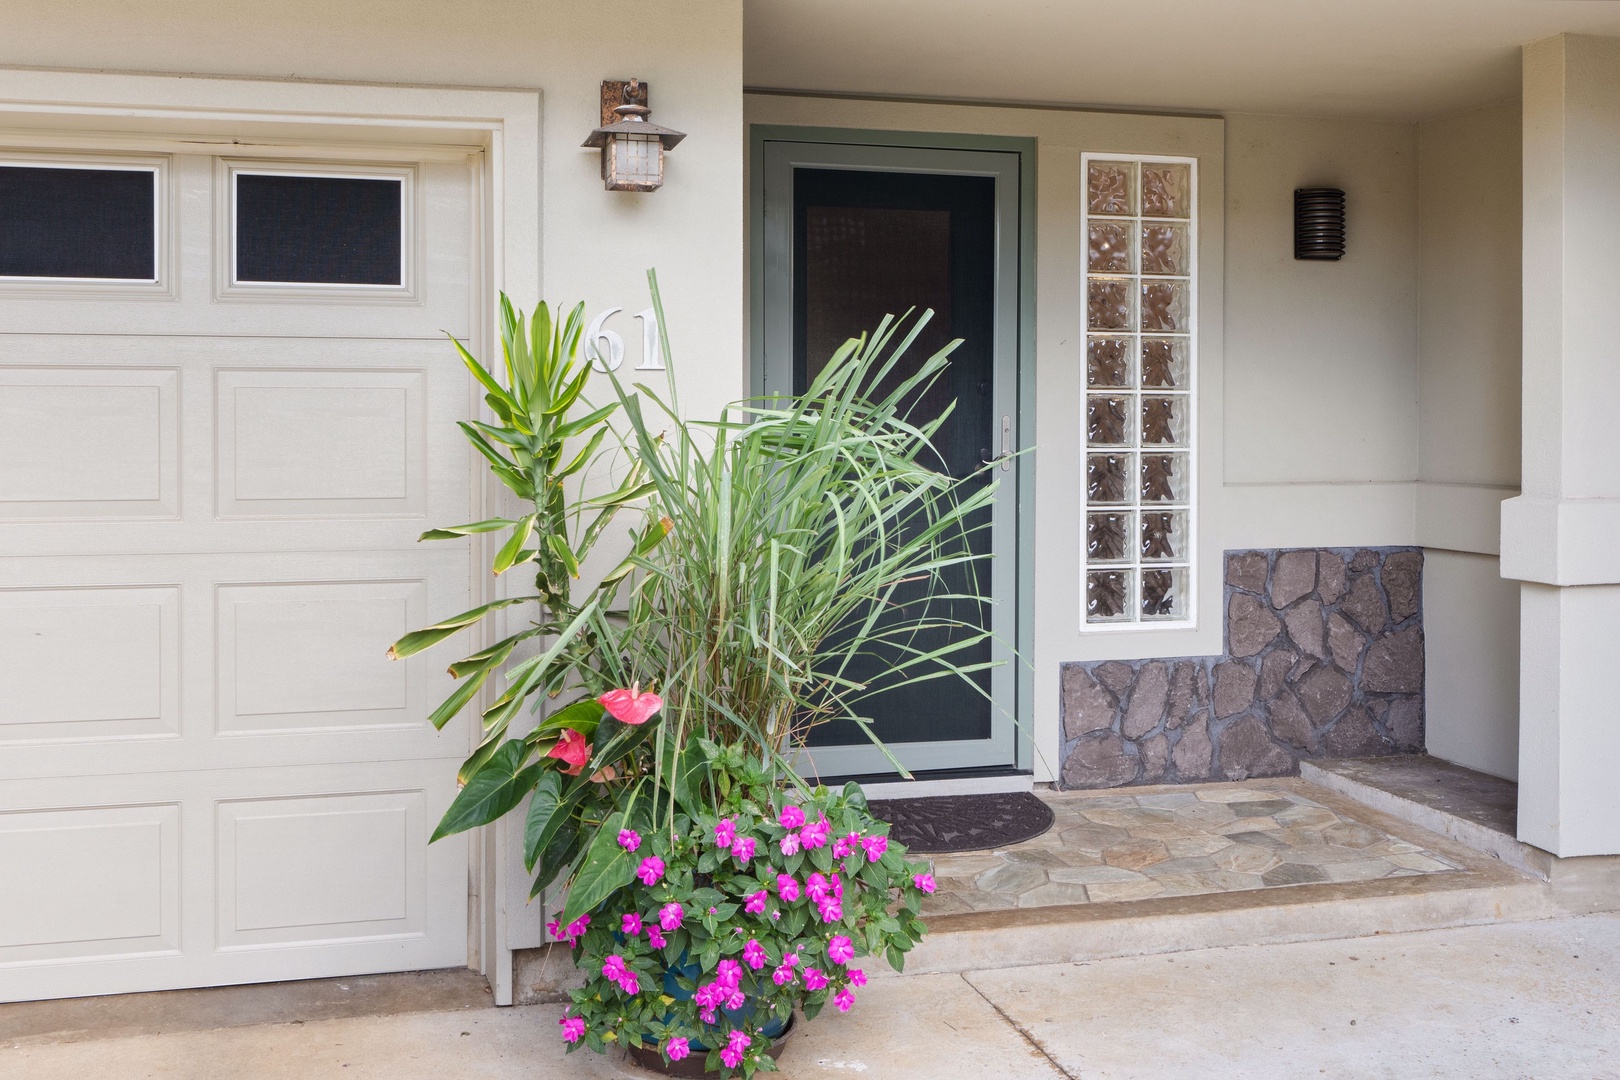 Princeville Vacation Rentals, Tropical Elegance - Your home away from home awaits